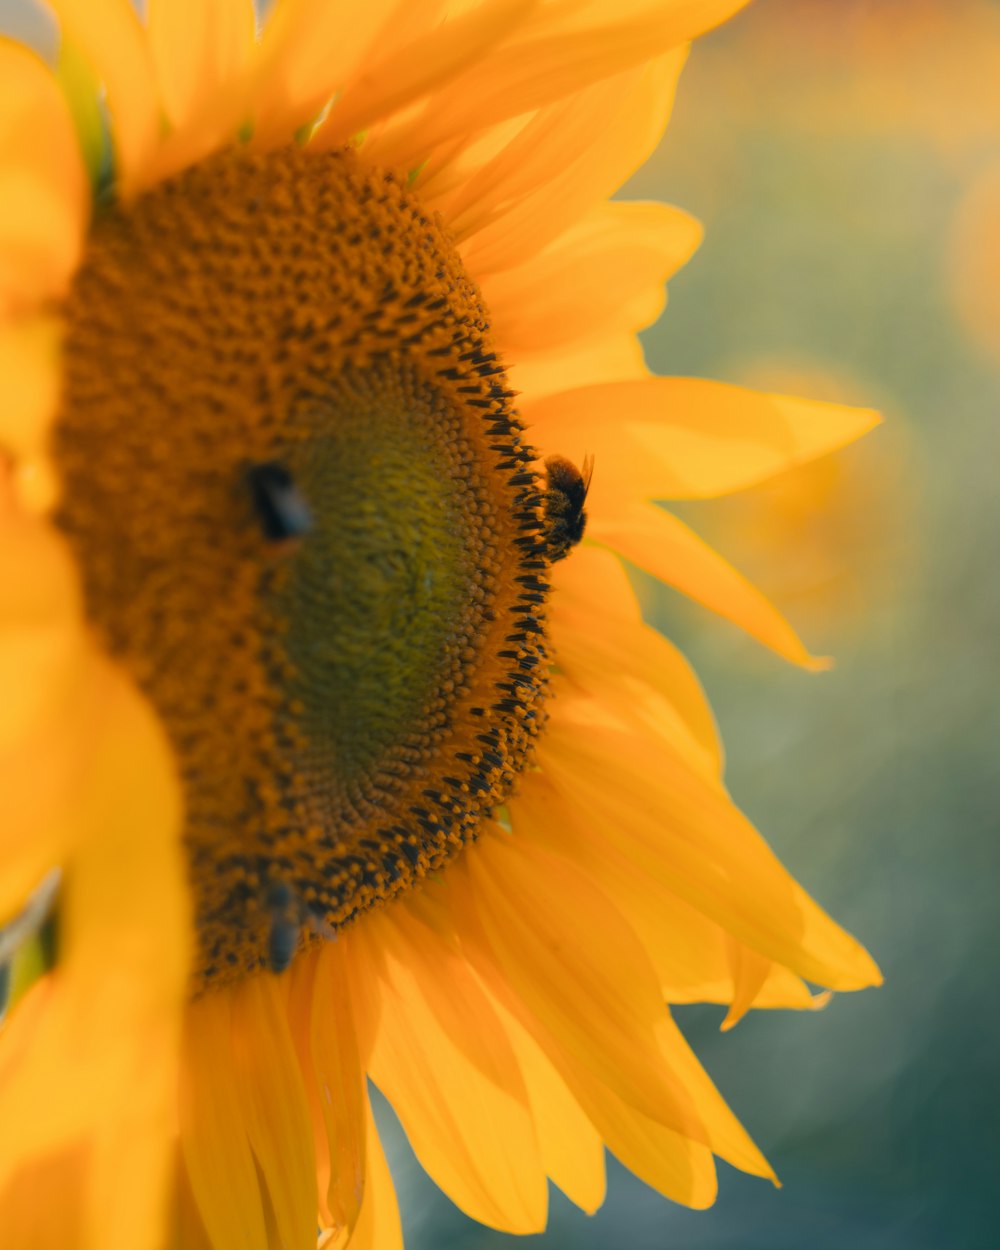 a yellow sunflower with a bee on it